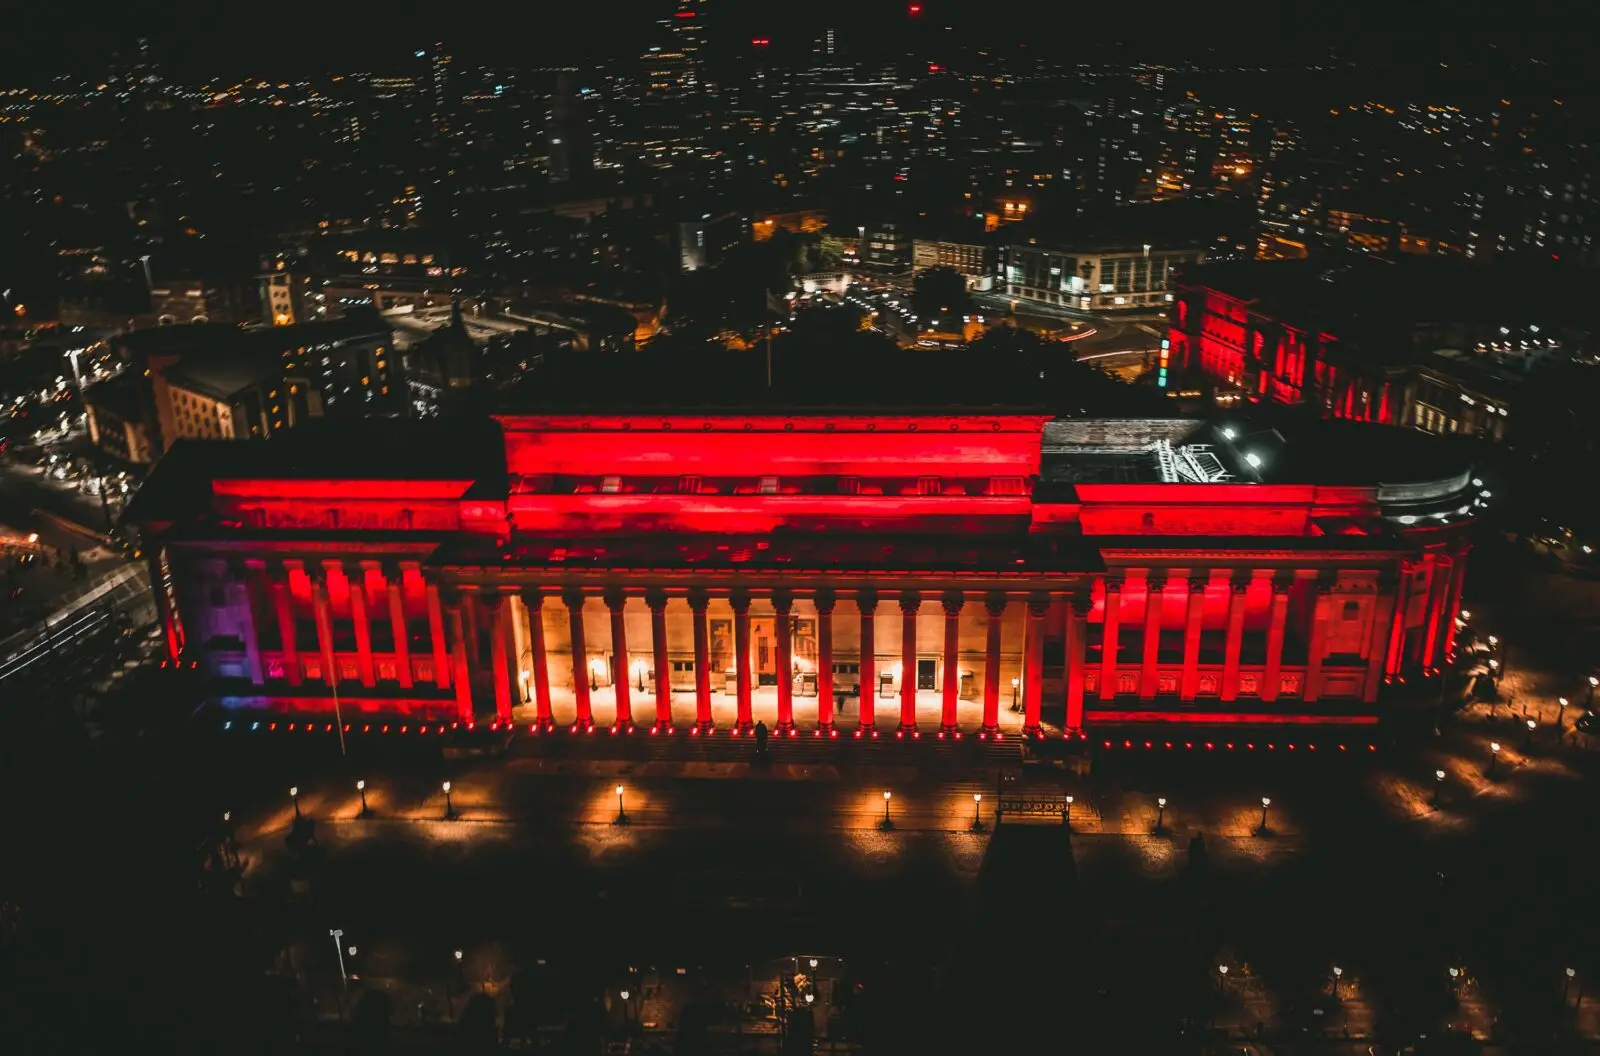 St George's Hall In Liverpool, England is lit up for World Heart Day